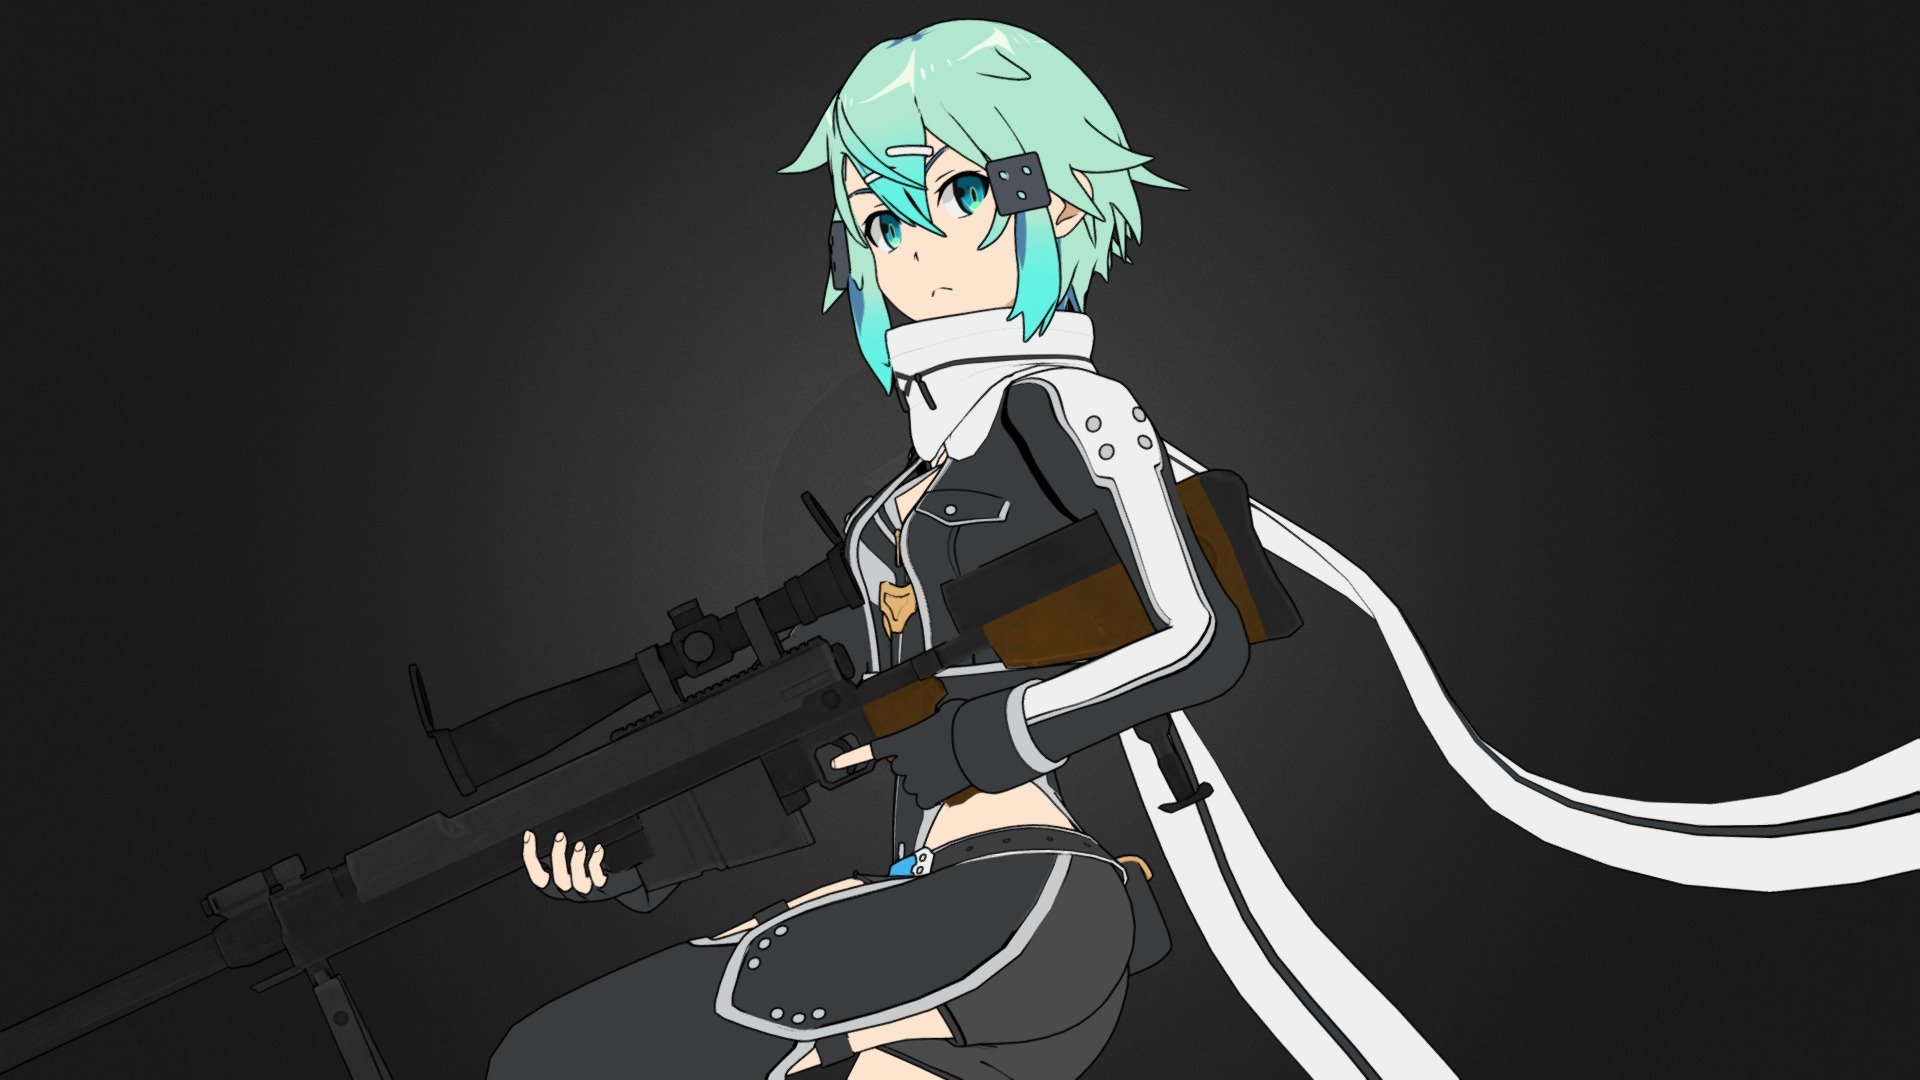 Sinon character from the anime Sword art Online II.

3D Model Rigged. With Shape Keys. In blend format, for Blender v2.8 - v3.1. EEVEE renderer, with nodes, material Toon Shader.

2 clothing color variations (Standard and All Black)

▬▬▬▬▬▬▬▬▬▬▬▬▬▬▬▬▬▬▬▬▬▬▬▬▬▬▬▬▬▬▬▬▬▬▬▬▬▬▬▬▬▬▬▬▬▬

Buy Artstation: https://www.artstation.com/a/10860433

Buy CGTrader: encurtador.com.br/agmo2

▬▬▬▬▬▬▬▬▬▬▬▬▬▬▬▬▬▬▬▬▬▬▬▬▬▬▬▬▬▬▬▬▬▬▬▬▬▬▬▬▬▬▬▬▬▬

Contents of the .ZIP file:

● Folder with all textures in .tga Format.

● .blend file with the complete 3D Model.

Contents of the .blend file:

● Sinon in Defalt version and All black Clothes

● Full body, no deleted parts.

● Individual Hair, separated from the body.

● Pieces of Clothing, separated from the body. (Individuals, Can be removed)

● Complete RIG, with all bones for movement. (Metarig Rigify Armature)

● Shape Keys.

● Textures embedded in the .blend file.

● Includes special effects.

● Includes PGM Ultima Ratio Hecate II Gun - Sinon - SAO Anime - 3D Model Blender - 3D model by Gilson.Animes 3d model